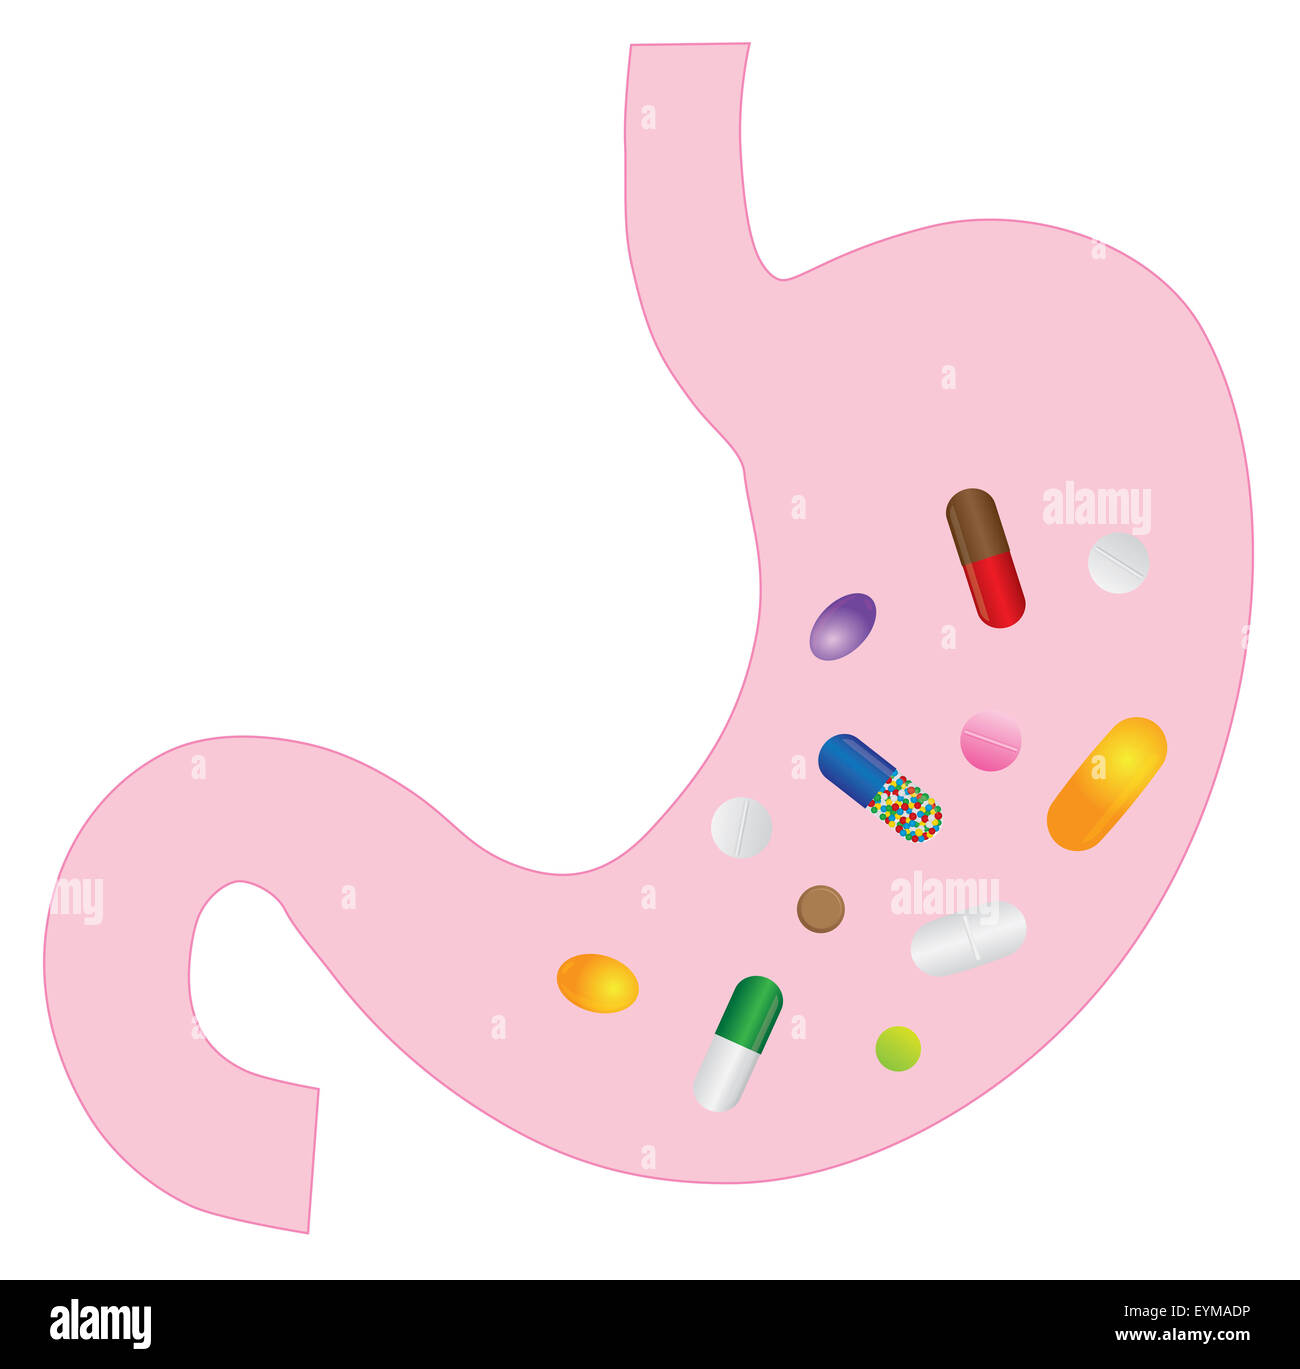 Human Stomach Anatomy with Medication Vitamins Pills Drugs Capsules Color Illustration Stock Photo